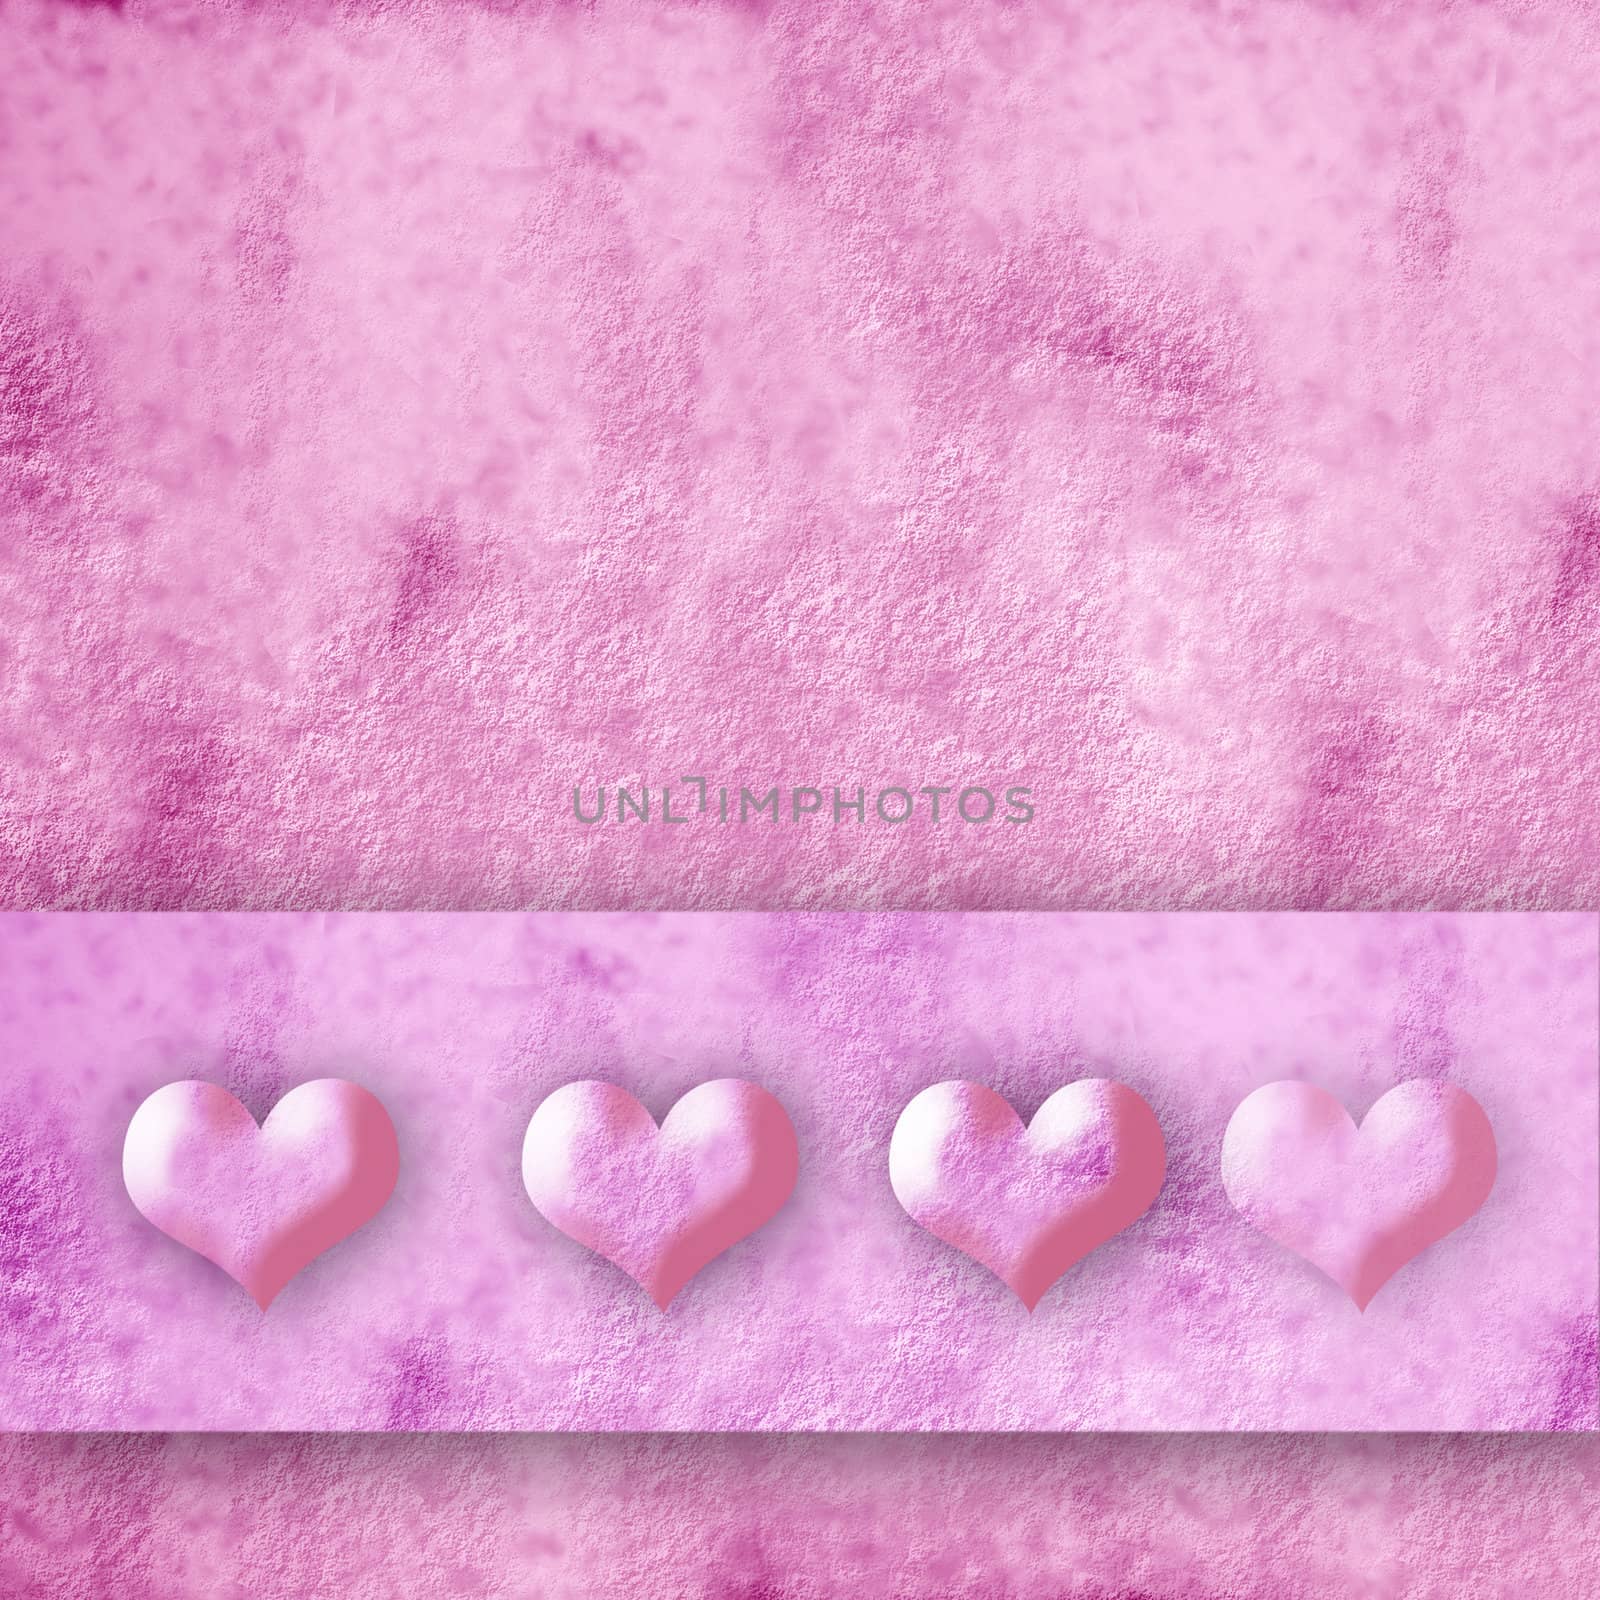 four small hearts on pink background